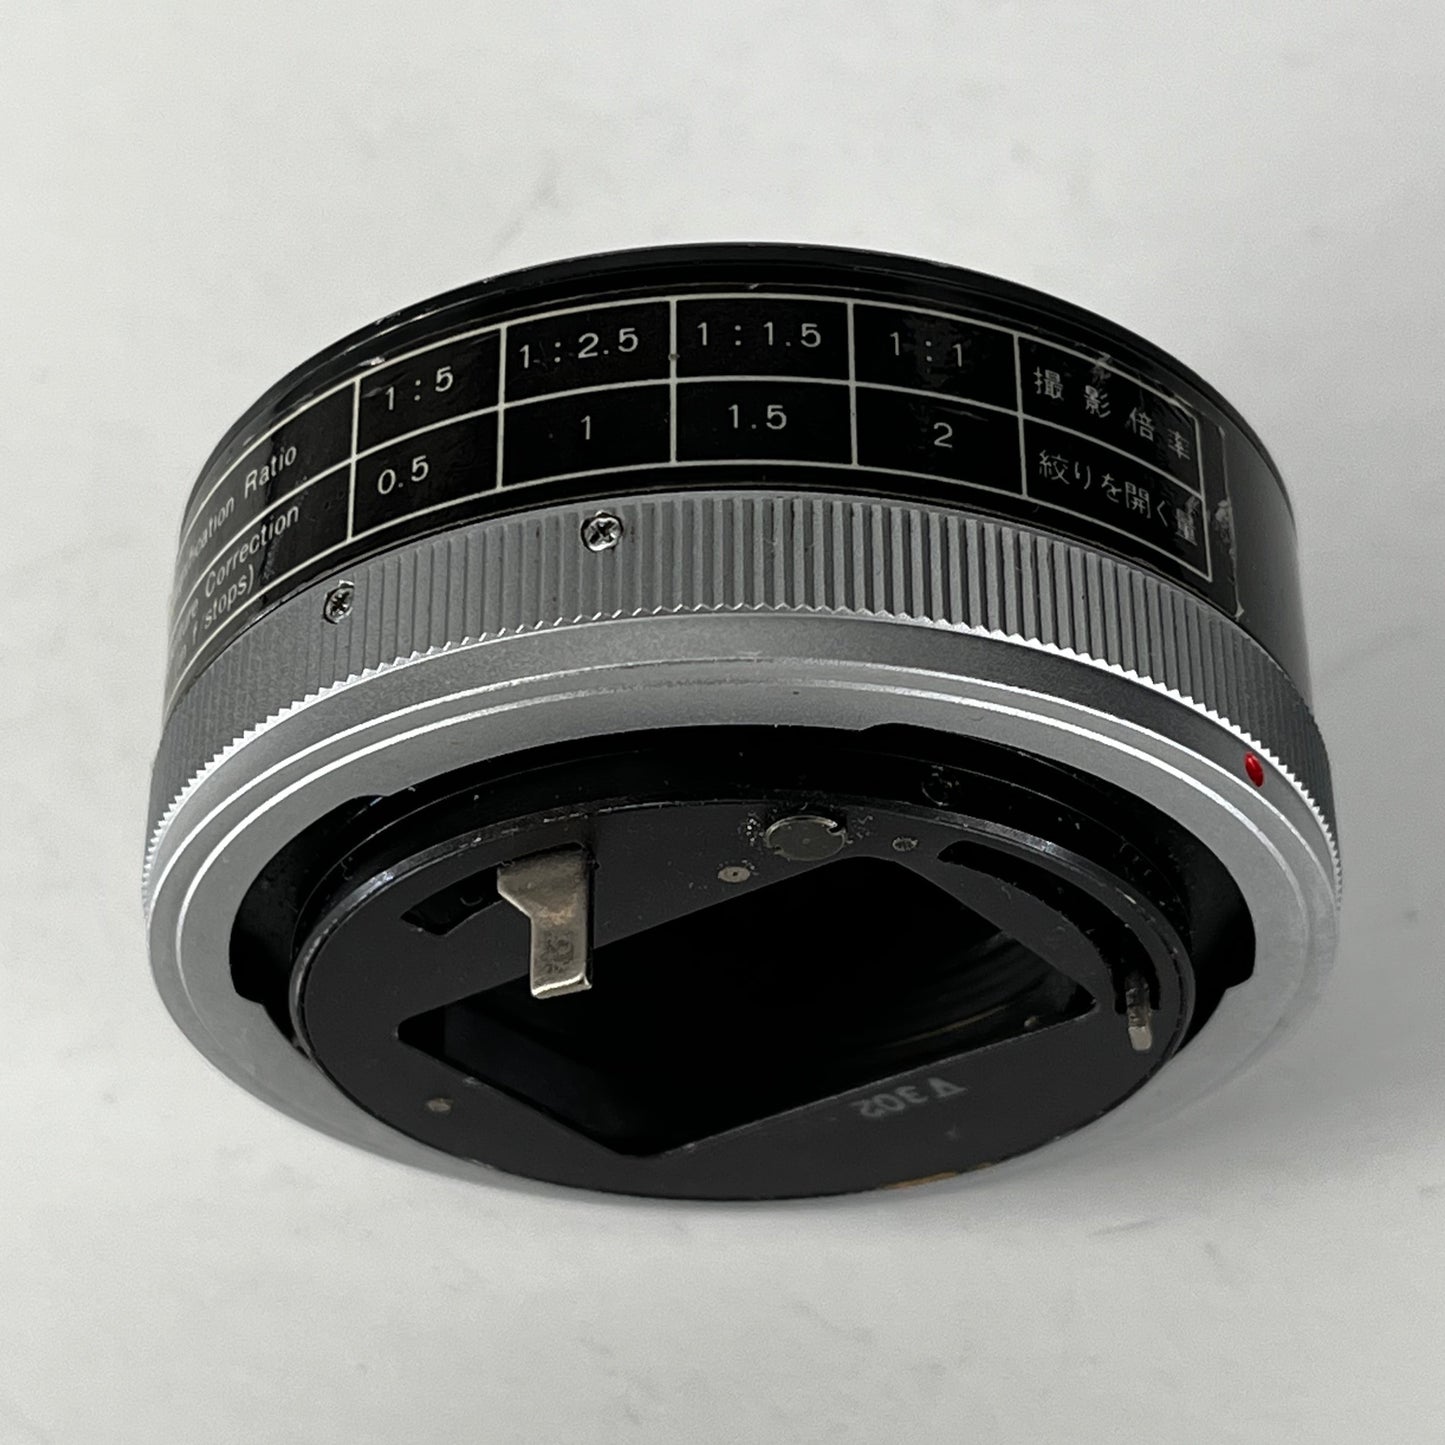 CANON FD 25 EXTENTION TUBE